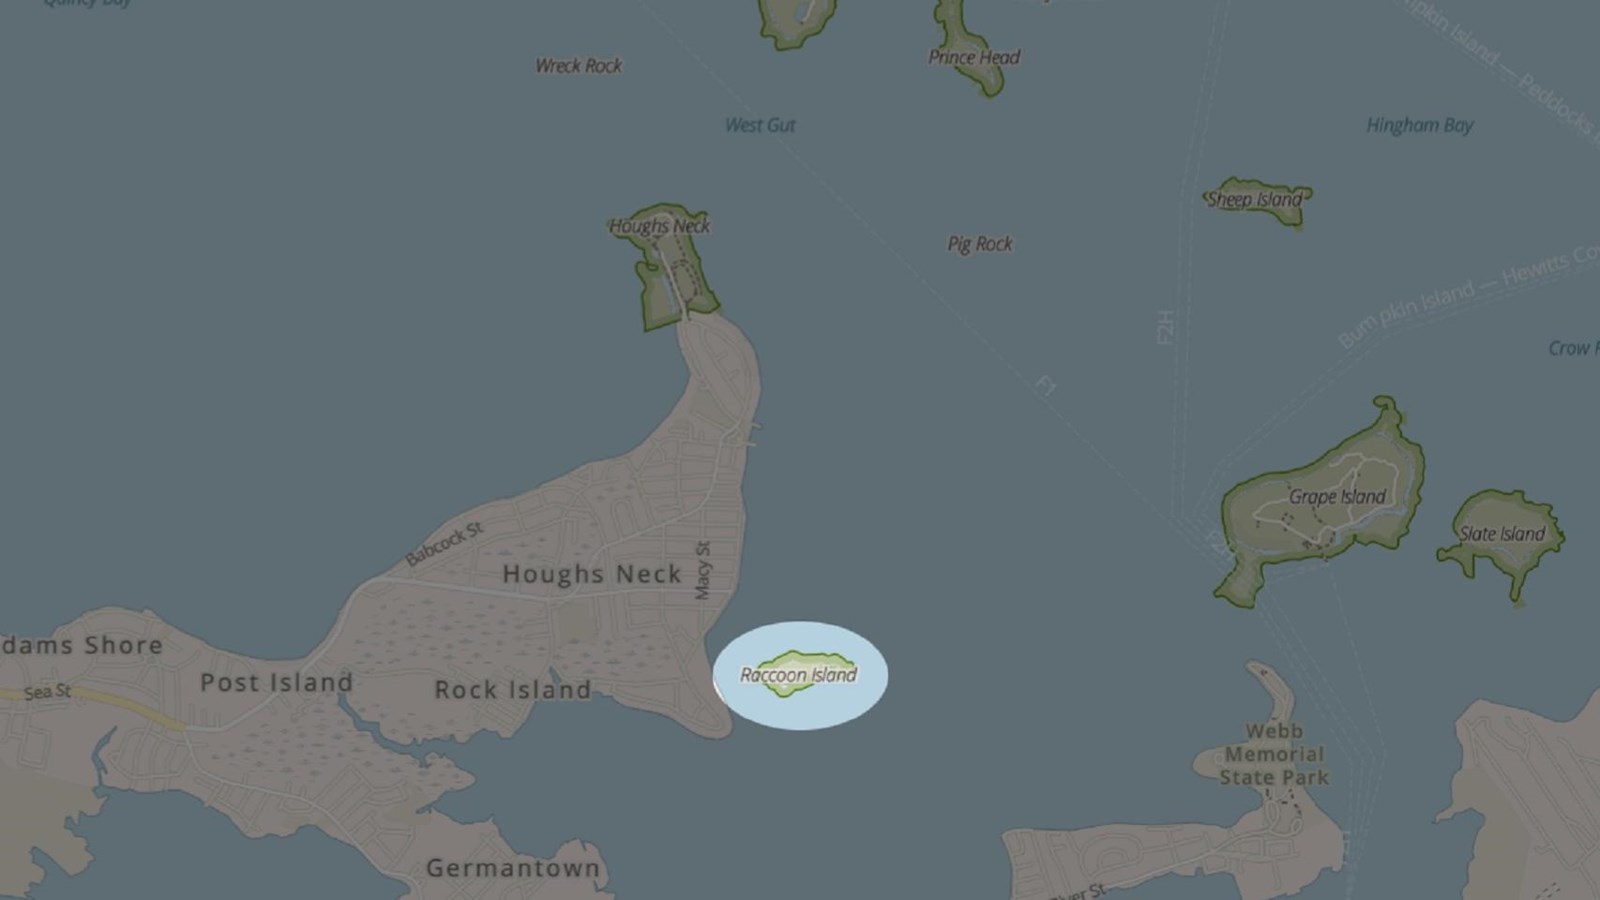 map of boston harbor near Houghs Neck. Off the coast is Raccoon Island, which is highlighted.